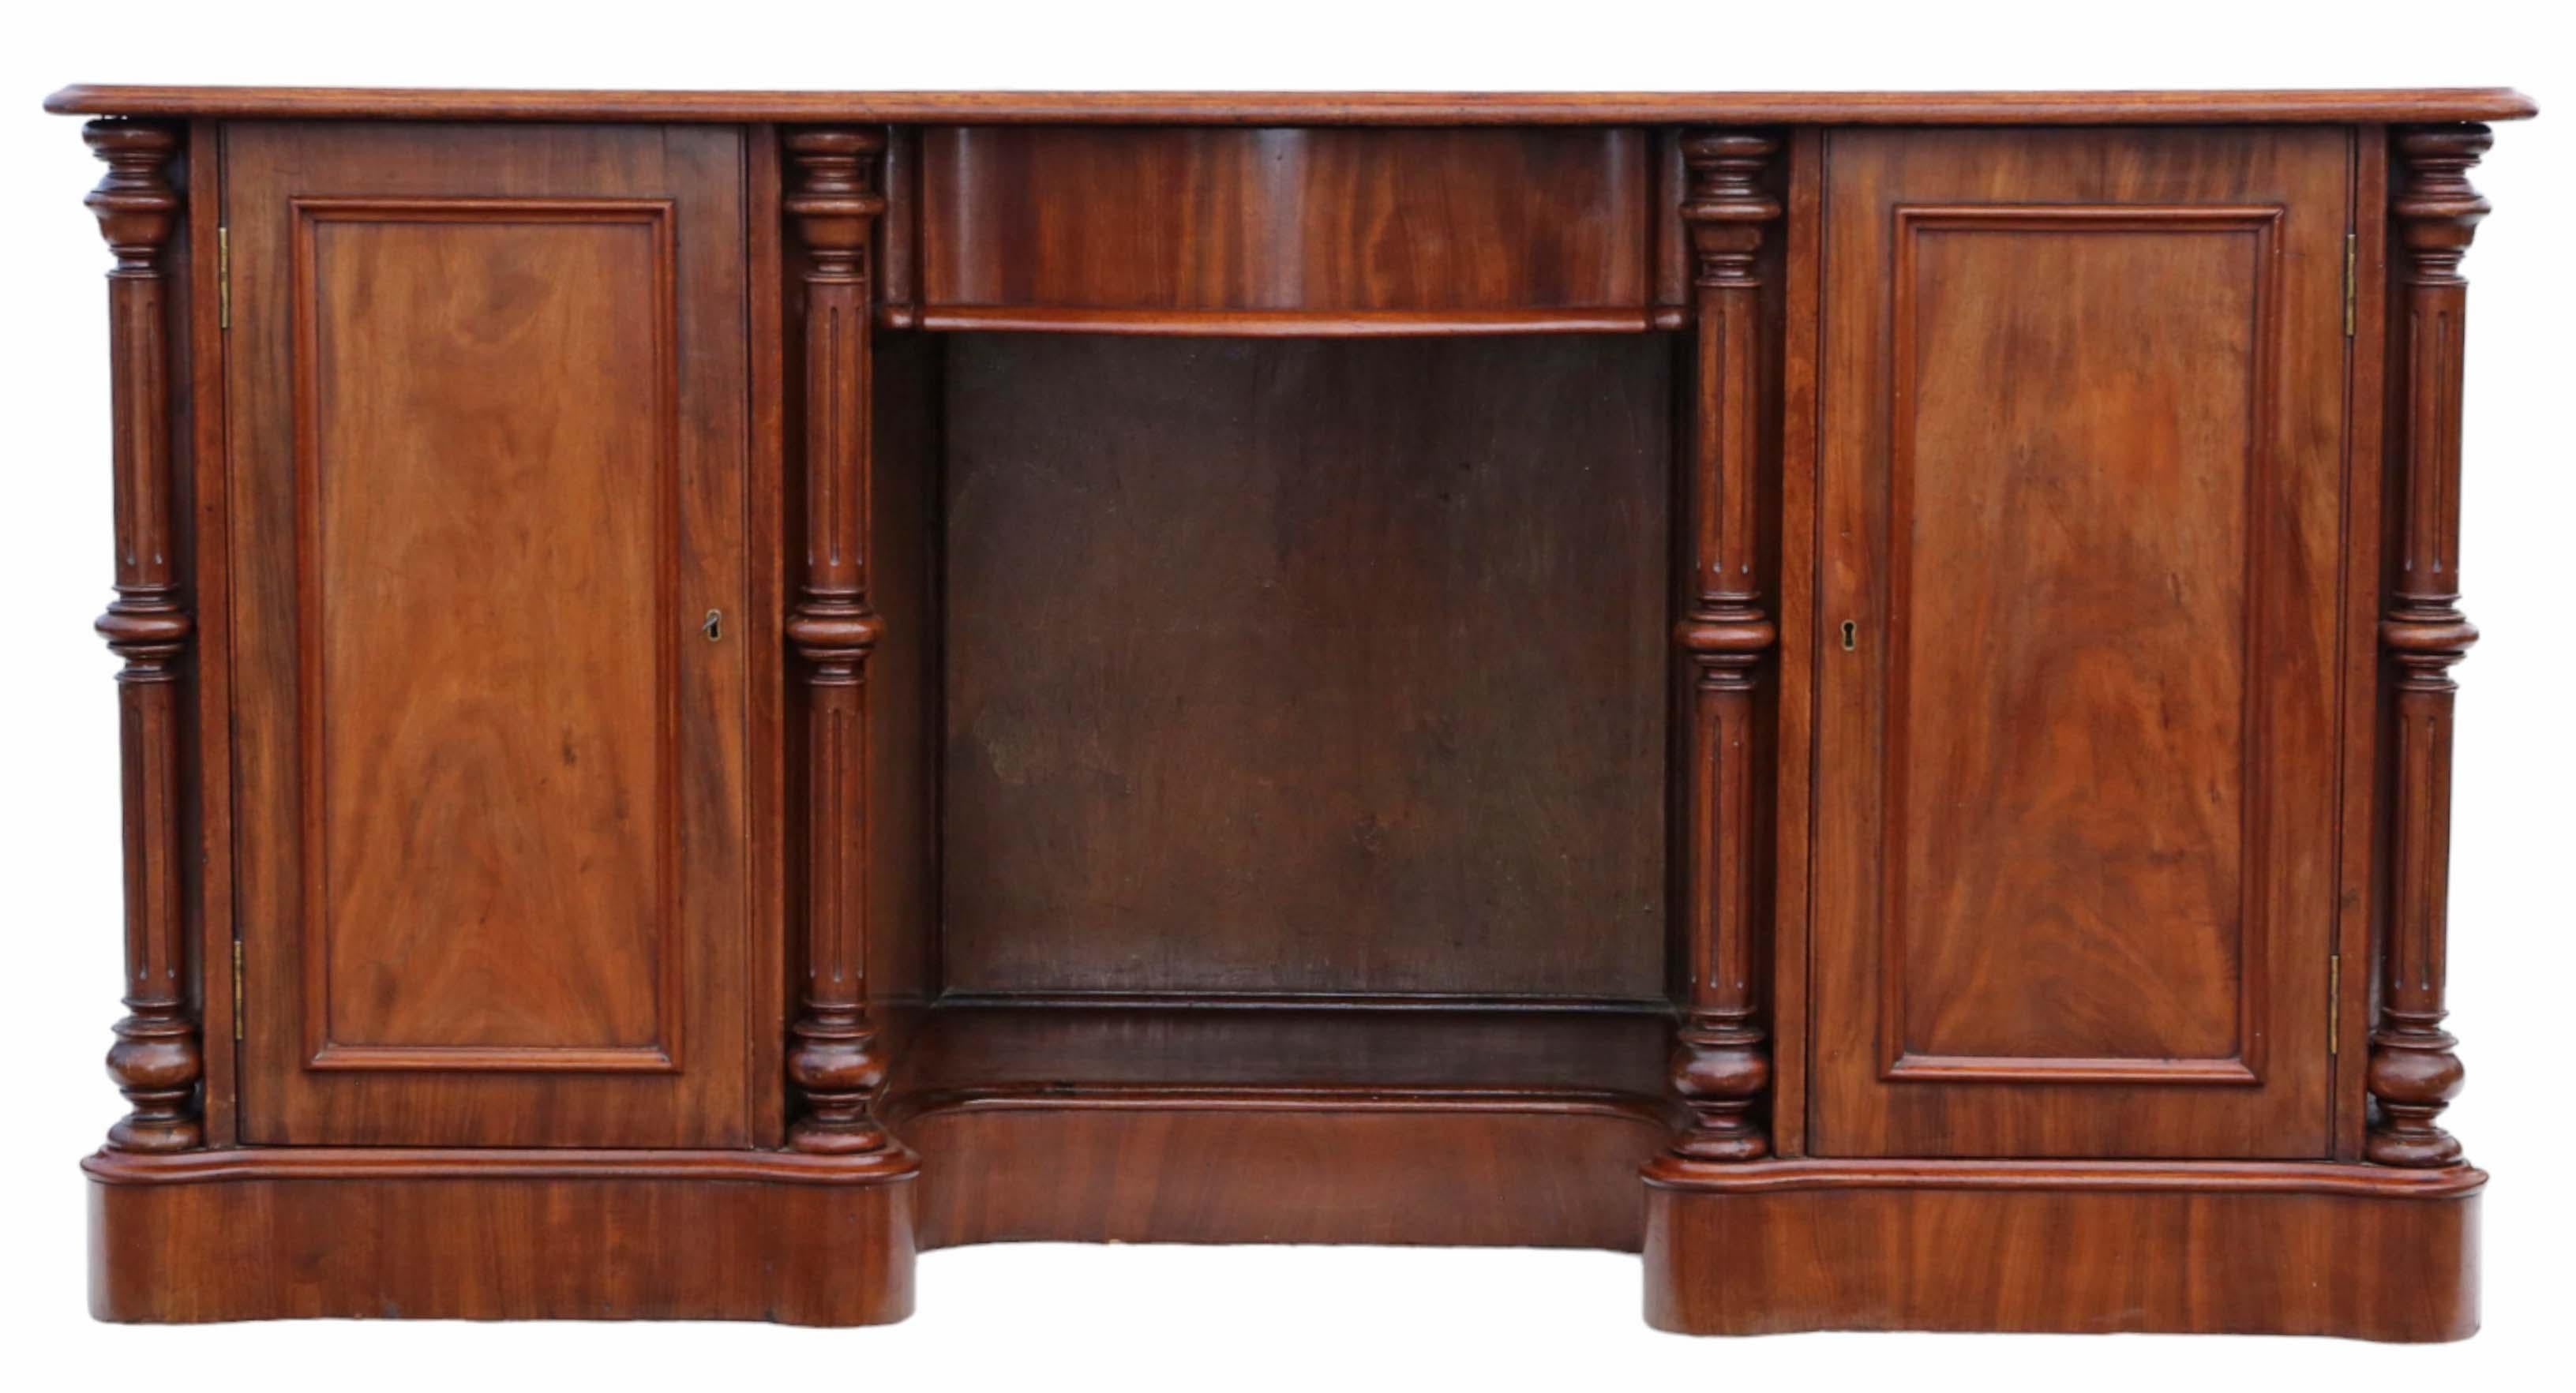 Antique, fine-quality large 19th Century mahogany twin-pedestal desk, dressing, or writing table. Exhibiting a lovely age, color, and patina, it stands on concealed brass and ceramic castors.

This piece is free from loose joints or woodworm,